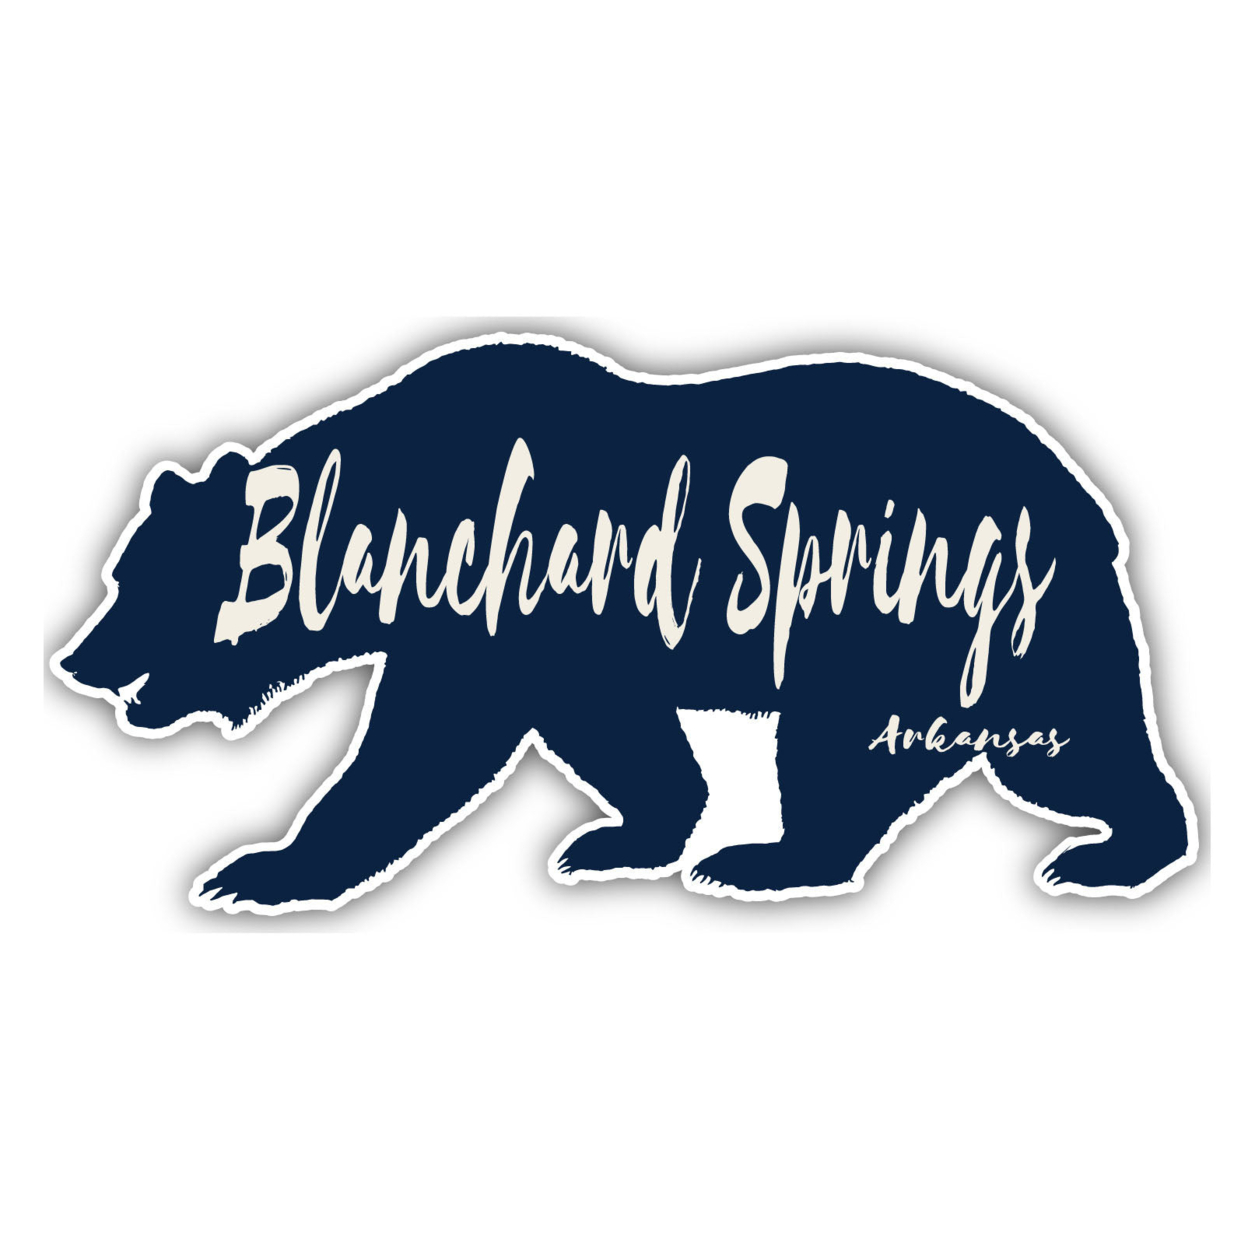 Blanchard Springs Arkansas Souvenir Decorative Stickers (Choose Theme And Size) - 4-Pack, 8-Inch, Bear